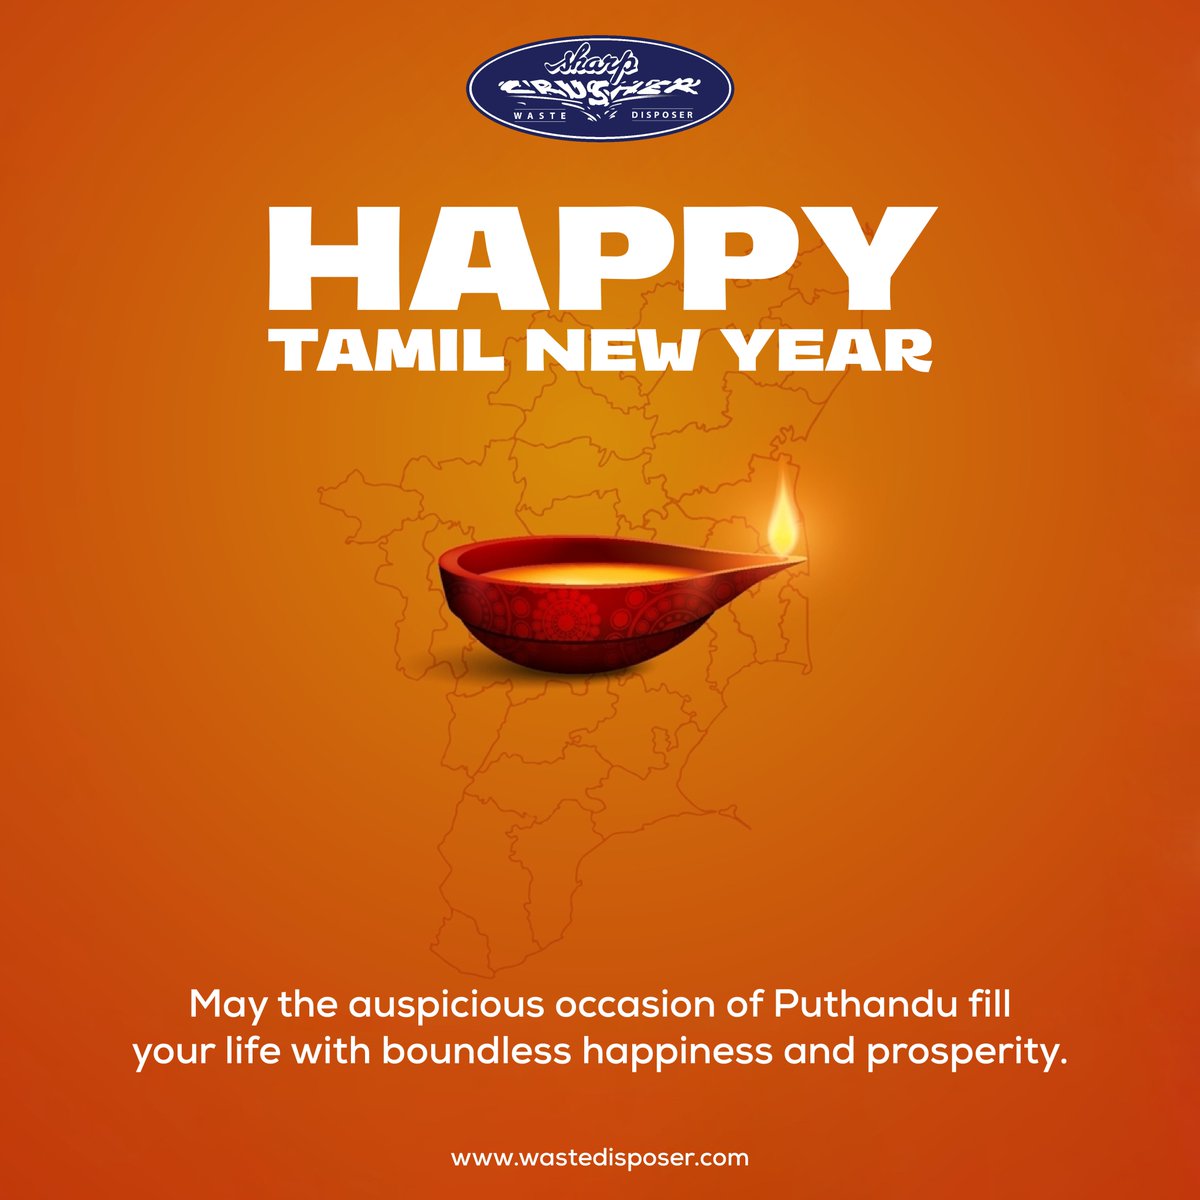 Wishing everyone a #HappyTamilNewYear ! 🌟

May this auspicious day bring joy, #prosperity, and #NewBeginnings  to all.

#SharpCrusher #Wastedisposer #happiness #tradition #newyear2024 #Puthandu